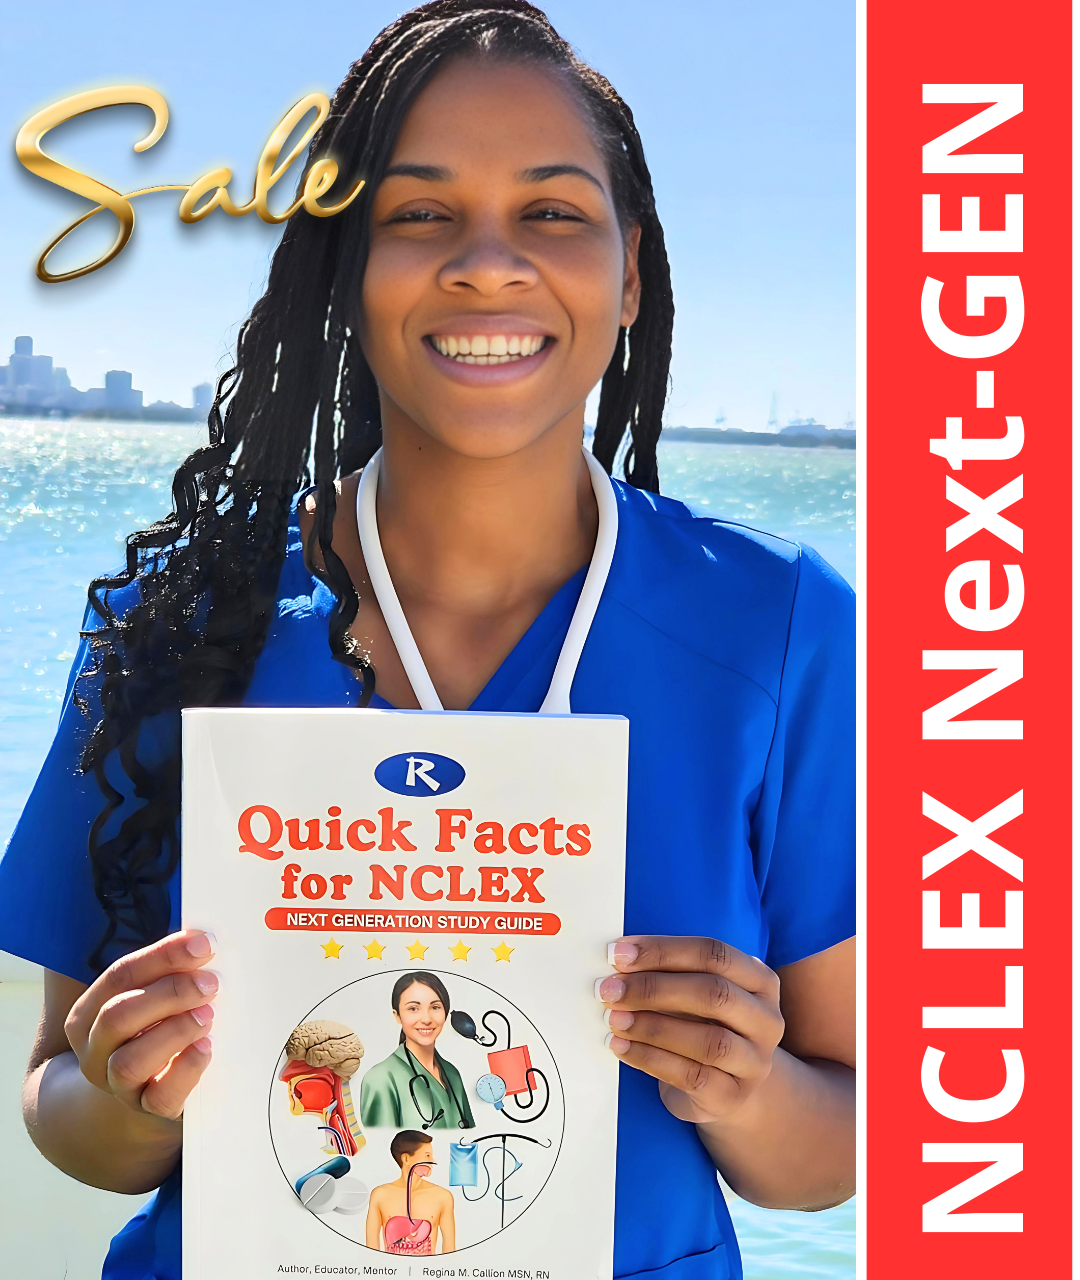 Quick Facts for NCLEX: #1 Next-Generation Study Guide